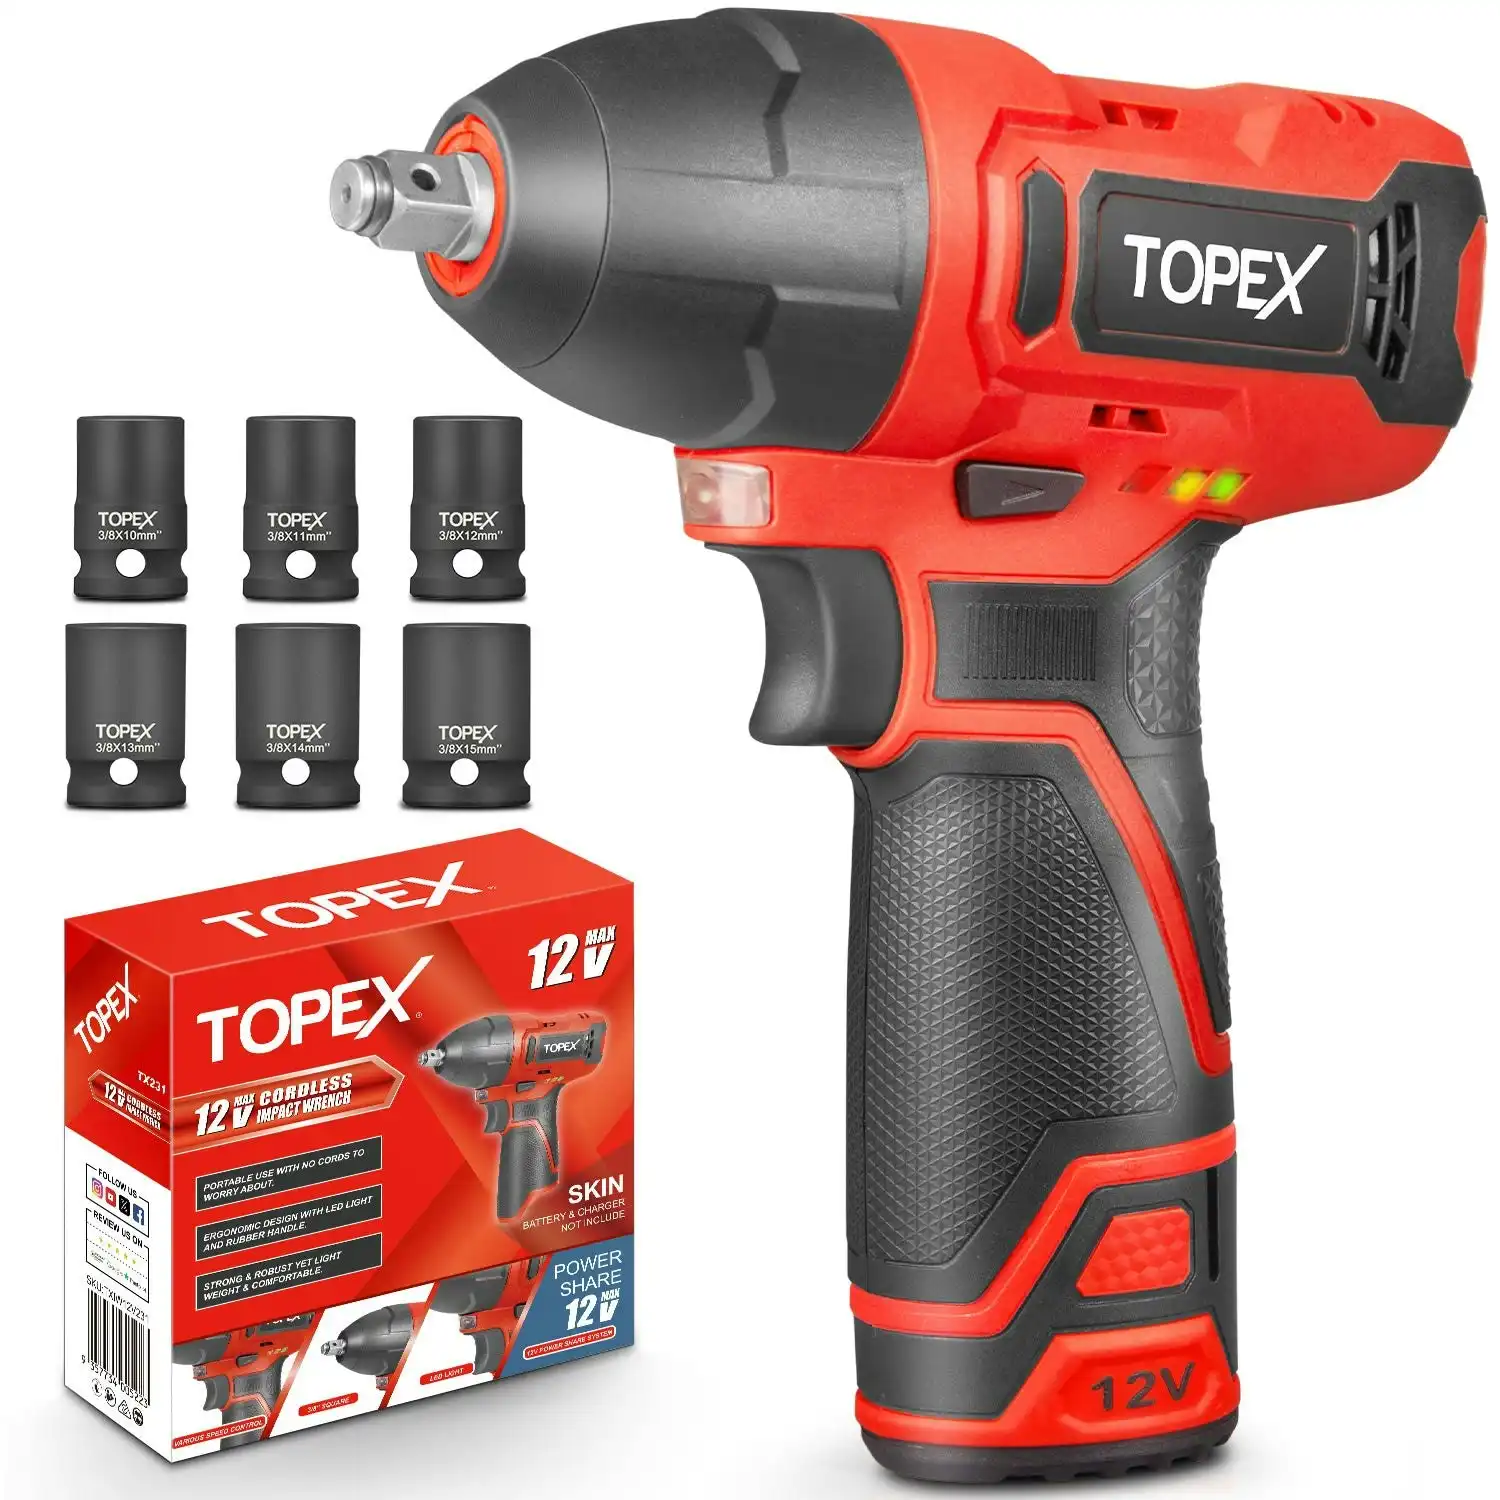 Topex 12V Cordless Impact Wrench with 3/8-Inch Chuck, Torque Max 120 N.m, 6 Sockets